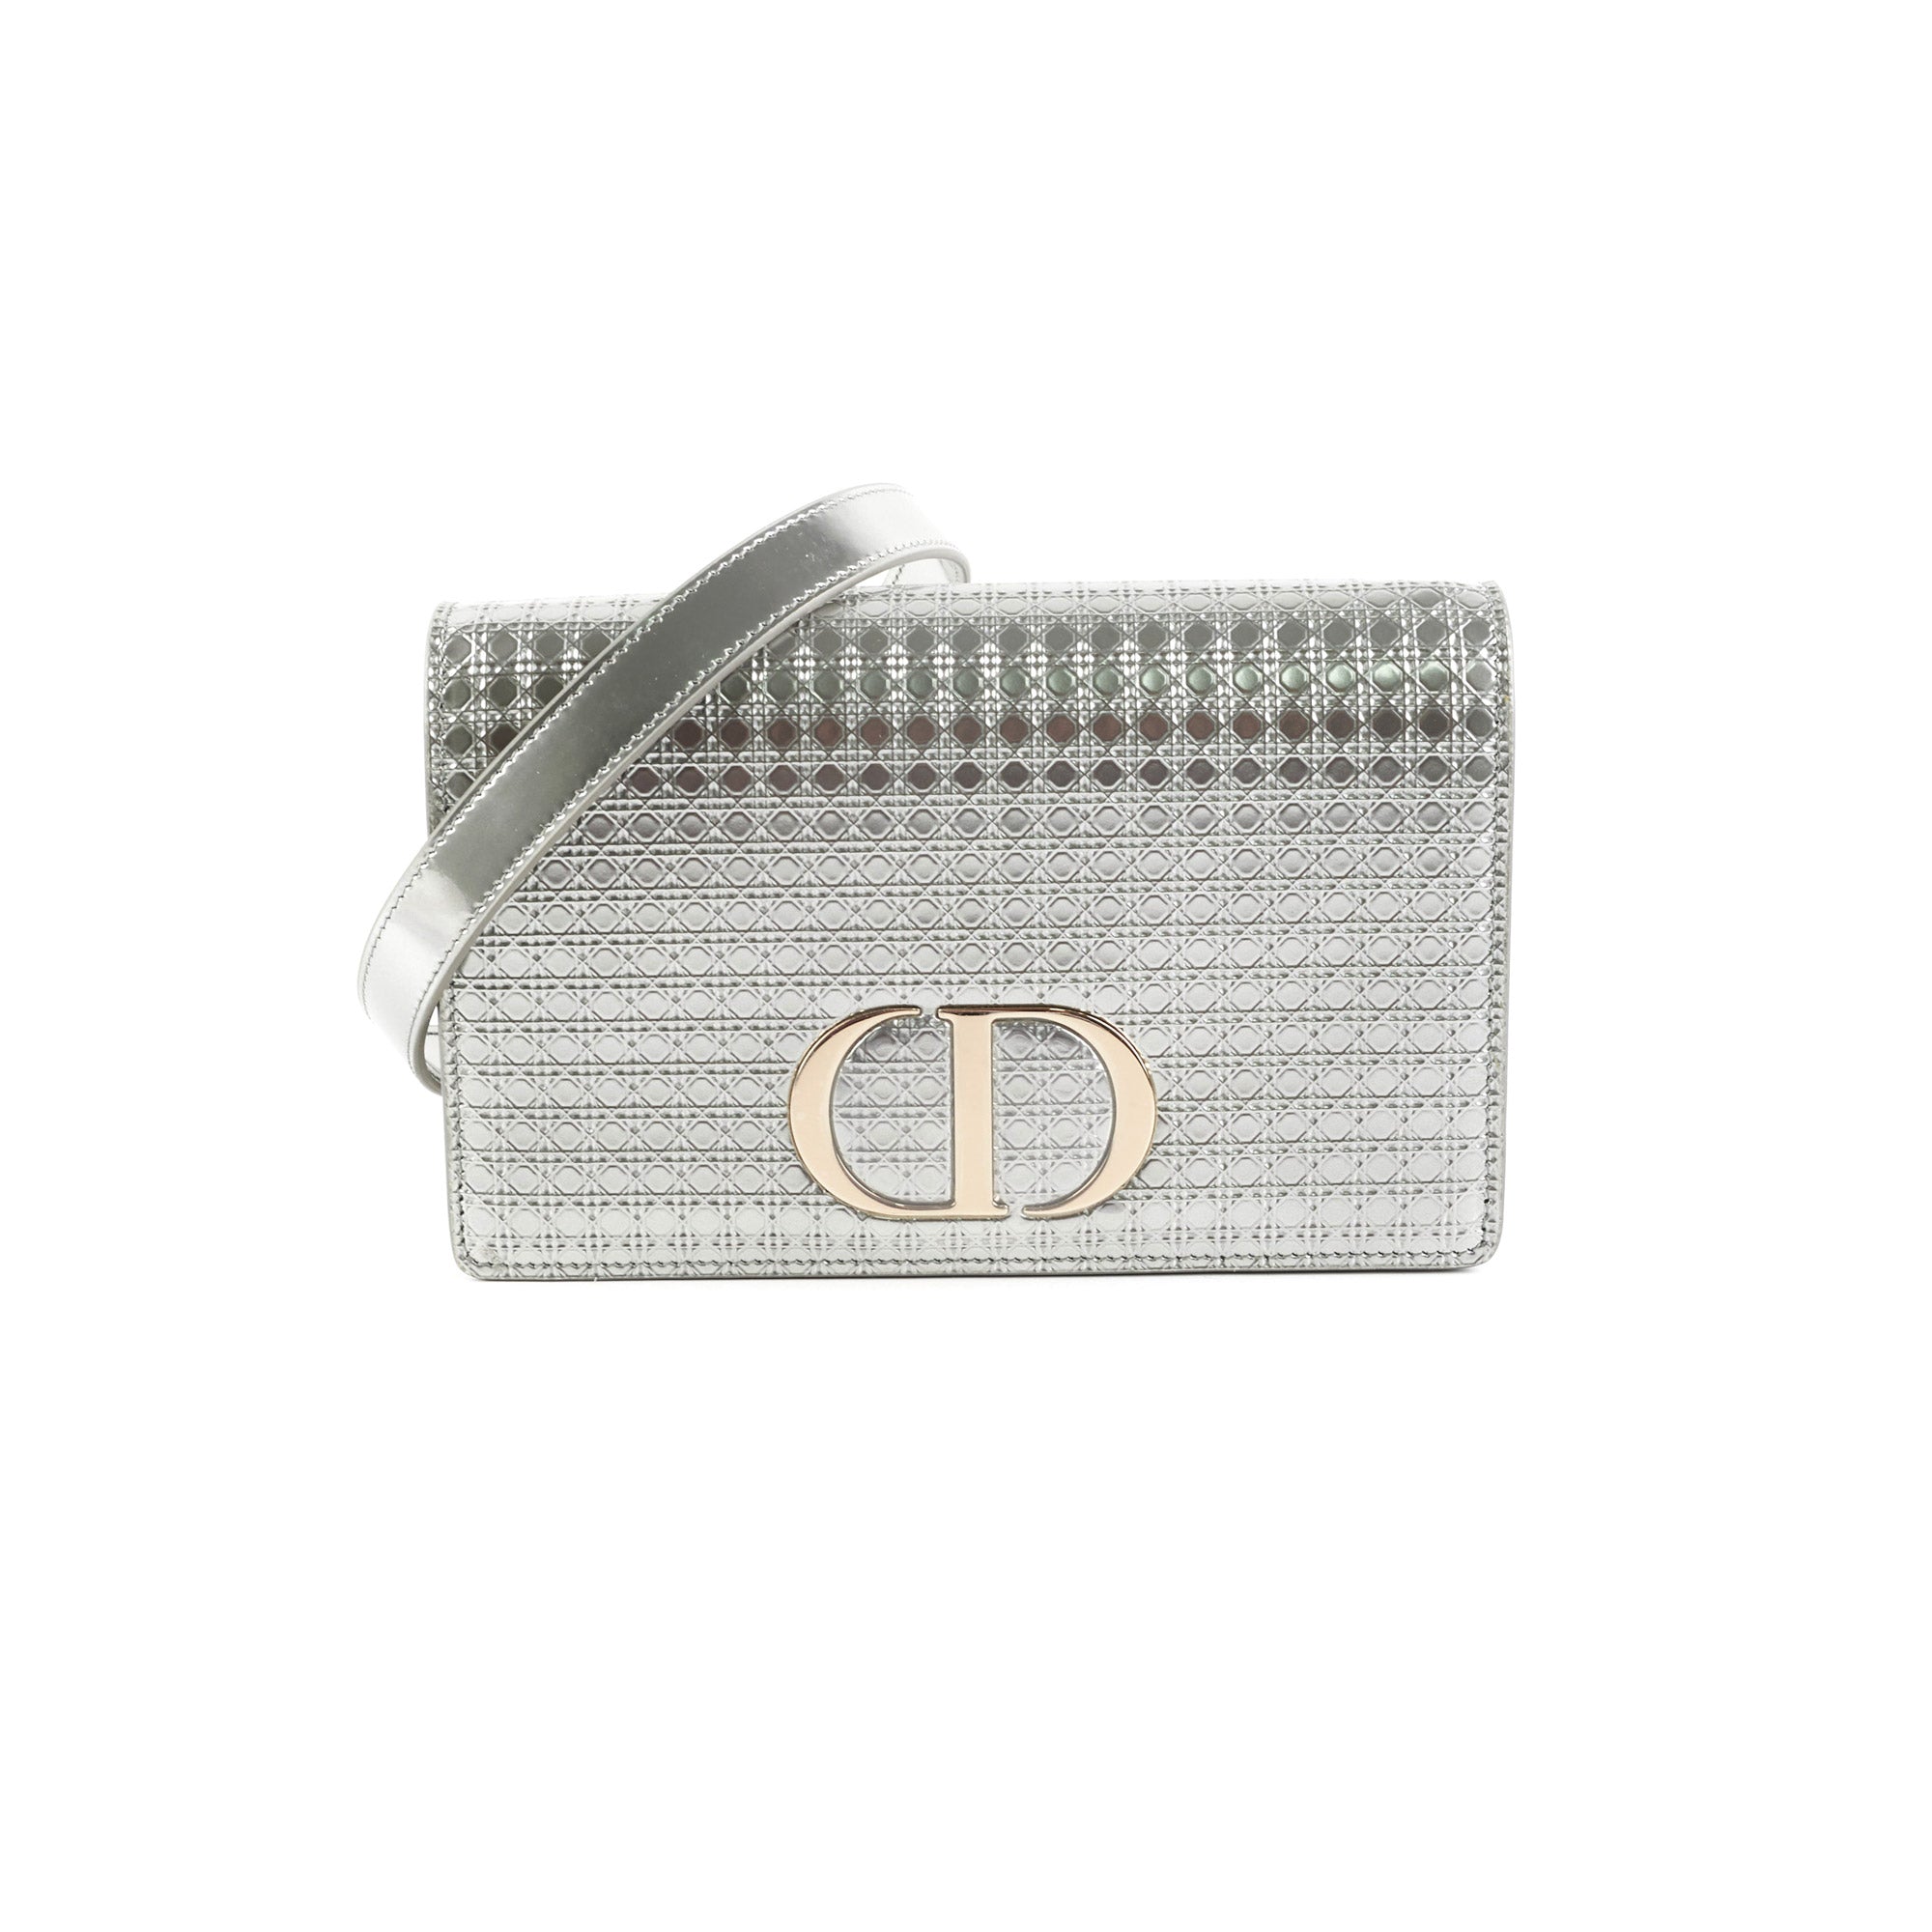 Dior Metallic Patent Micro-Cannage 30 Montaigne Belt Shoulder Bag, Silver, NEW